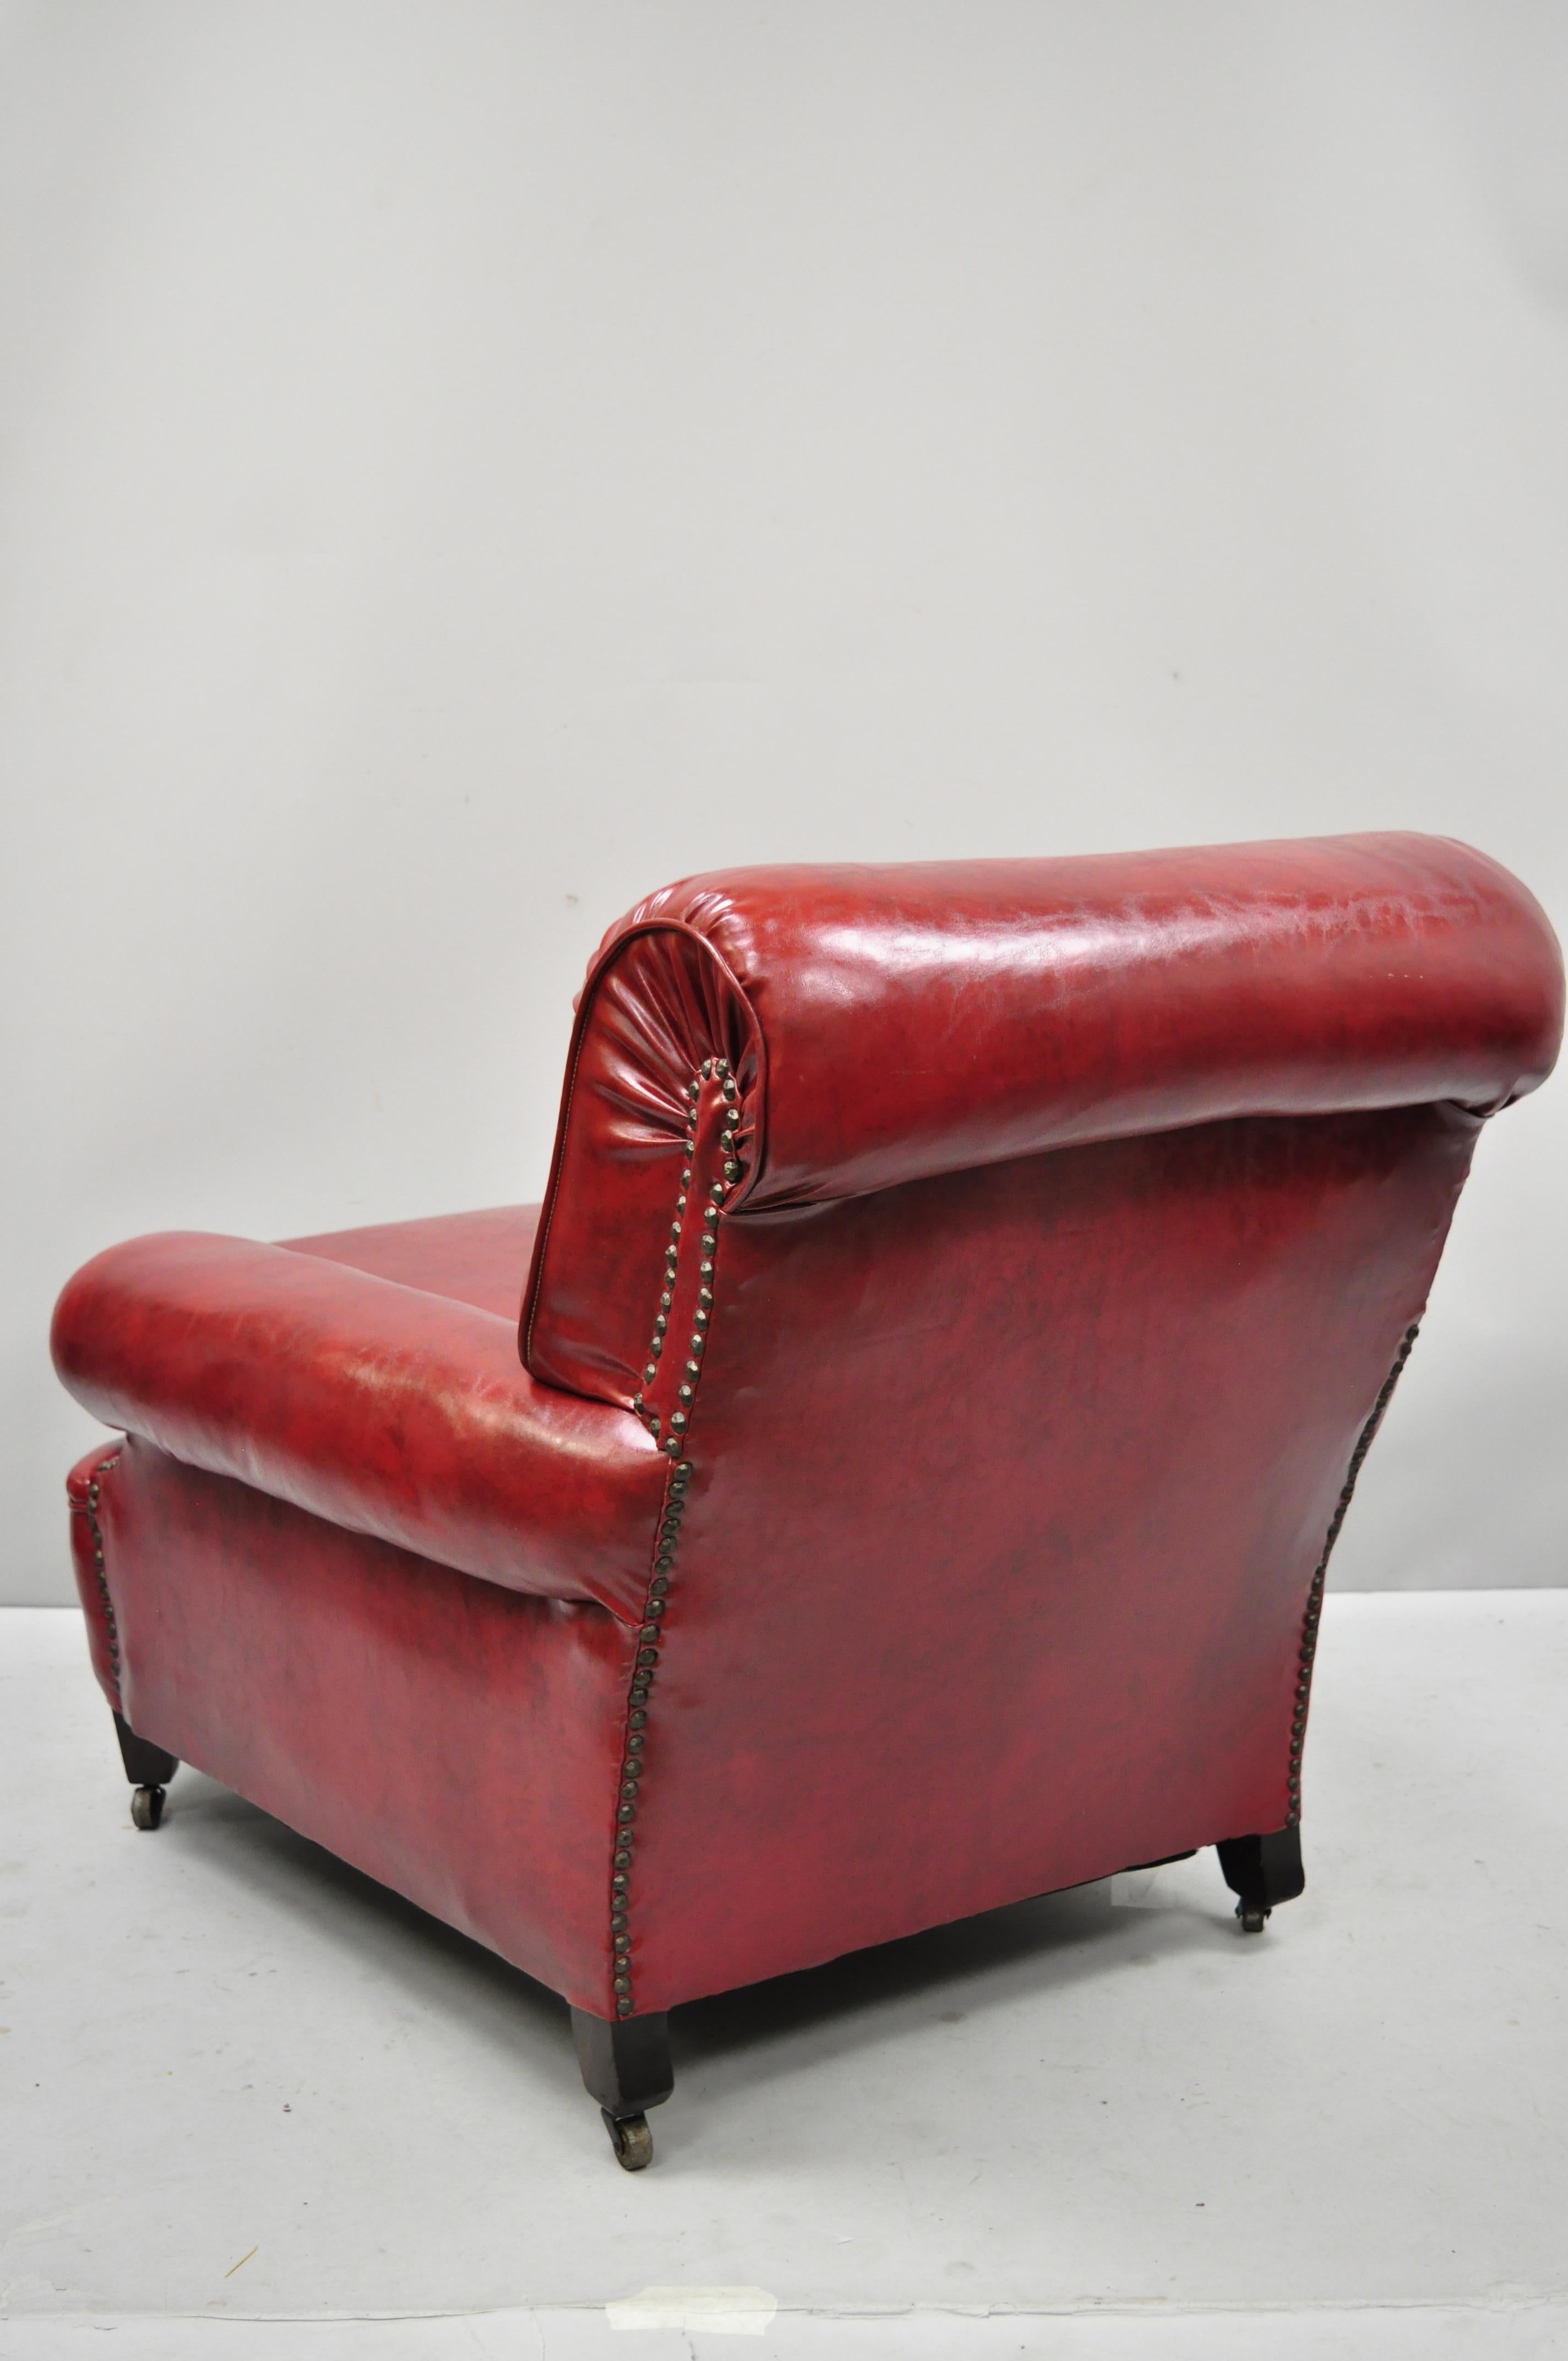 Antique English Regency Style Burgundy Red Vinyl Faux Leather Club Lounge Chair 1